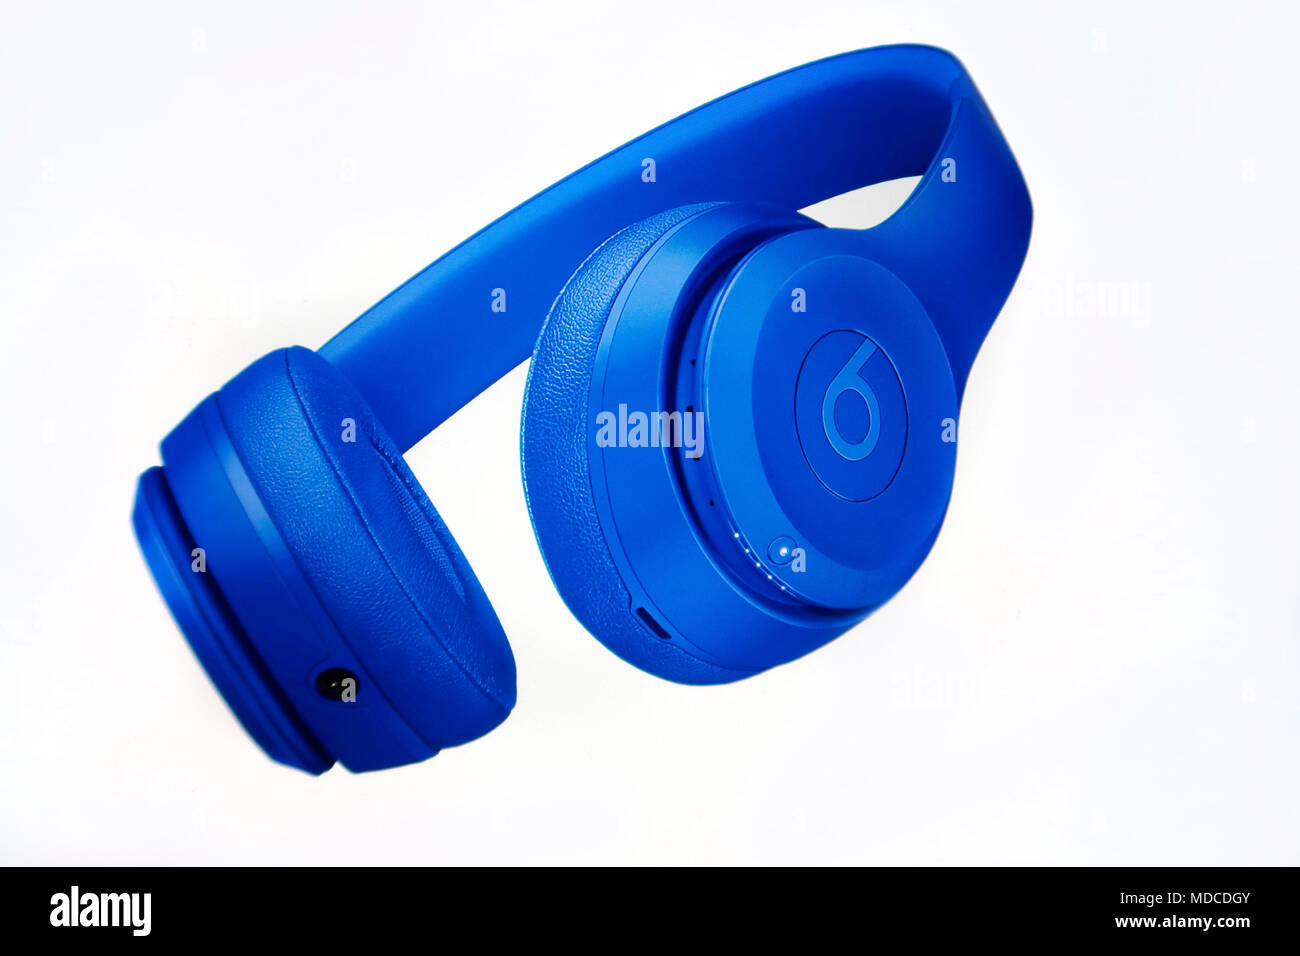 Iconic Beats Headphones by Dr Dre Stock Photo